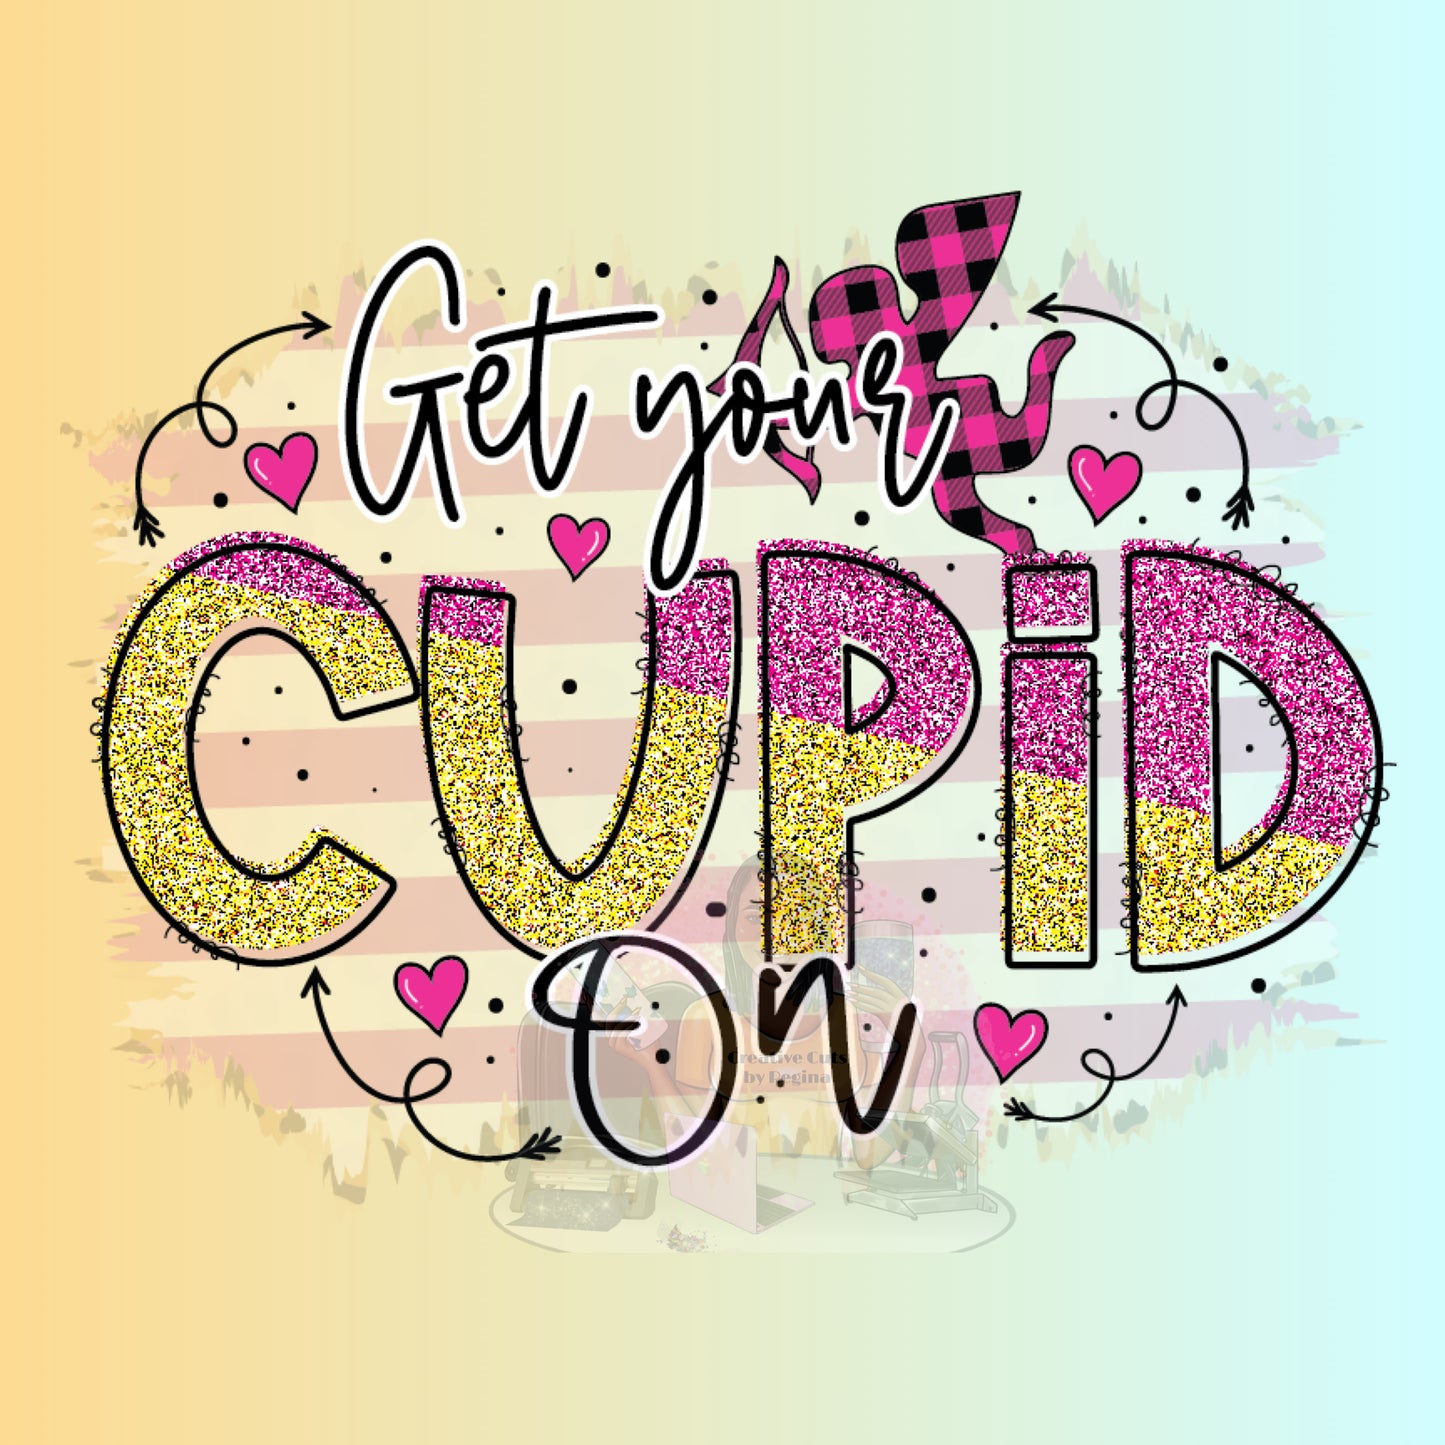 Get Your Cupid On